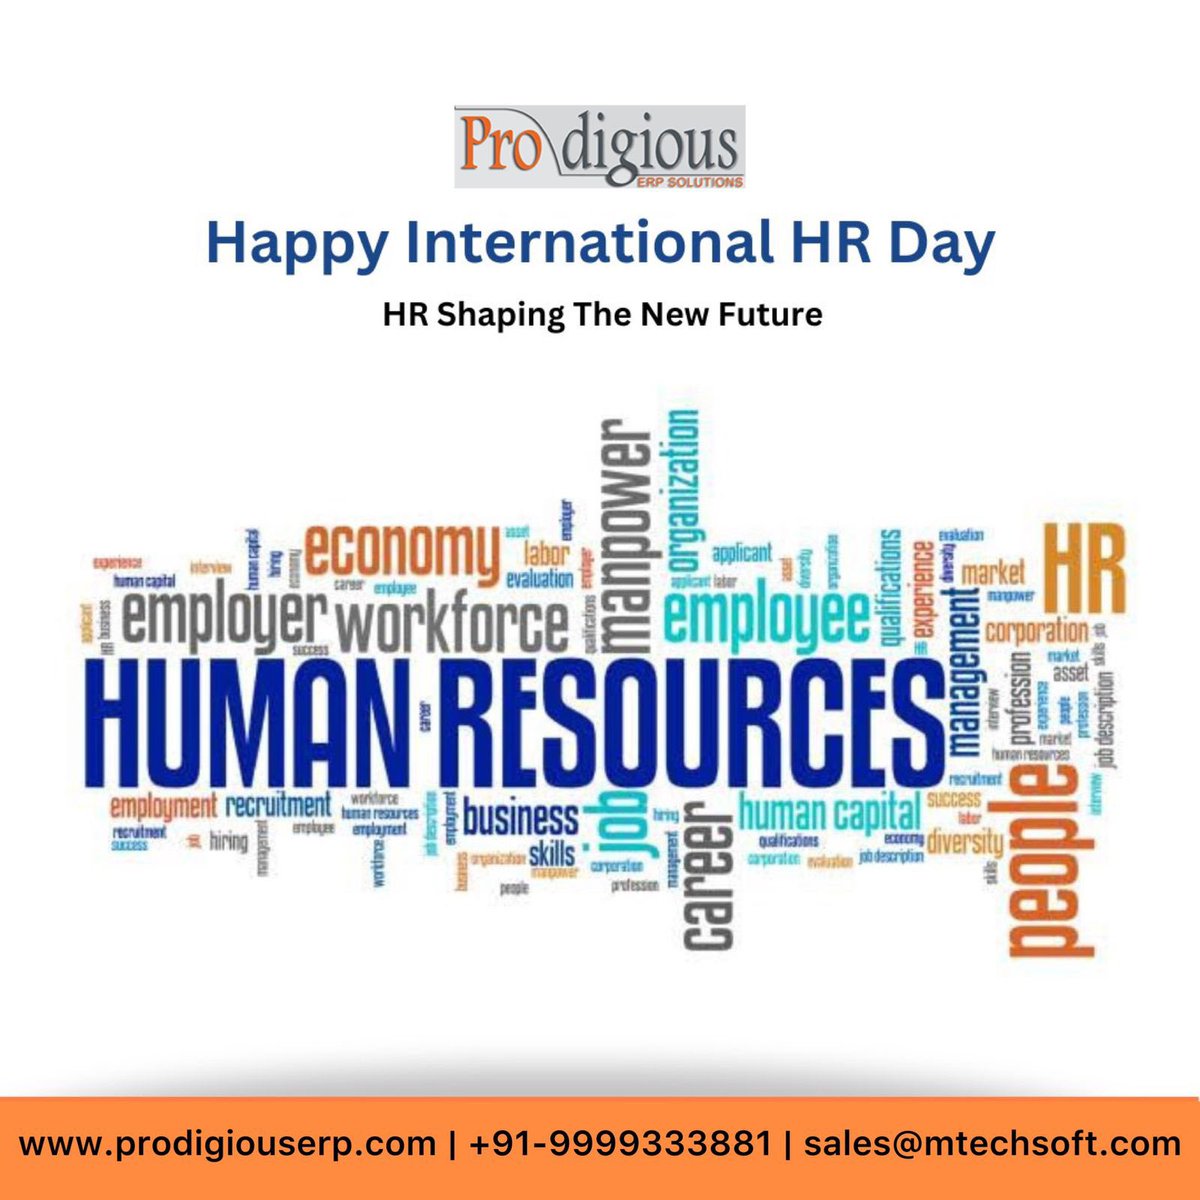 Happy International HR Day!

Today, we celebrate the backbone of every successful organization – the #HR professionals who sprinkle their magic HR dust & keep the wheels of the workplace turning smoothly✨

#InternationalHRDay #humaresources #HRDay #digitalindia #madeinindia